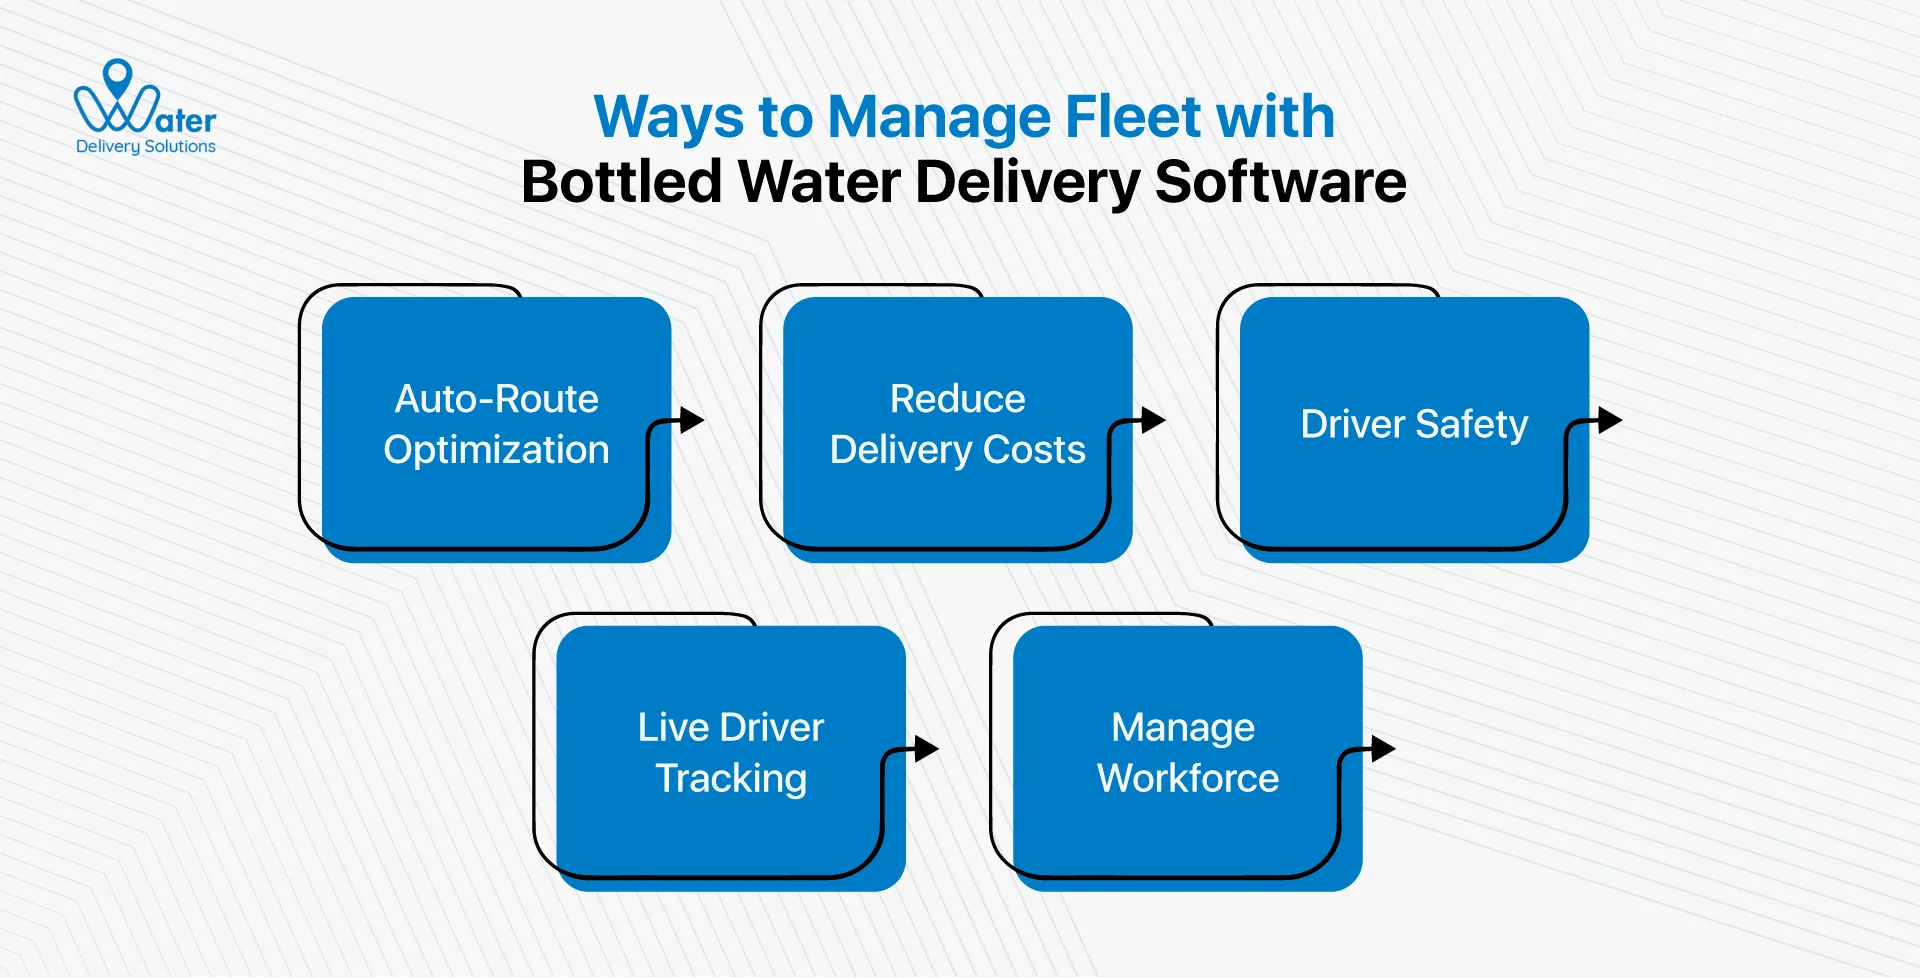 ravi garg, wds, fleet, bottled water, delivery, auto-route, driver maps, driver tracking, workforce